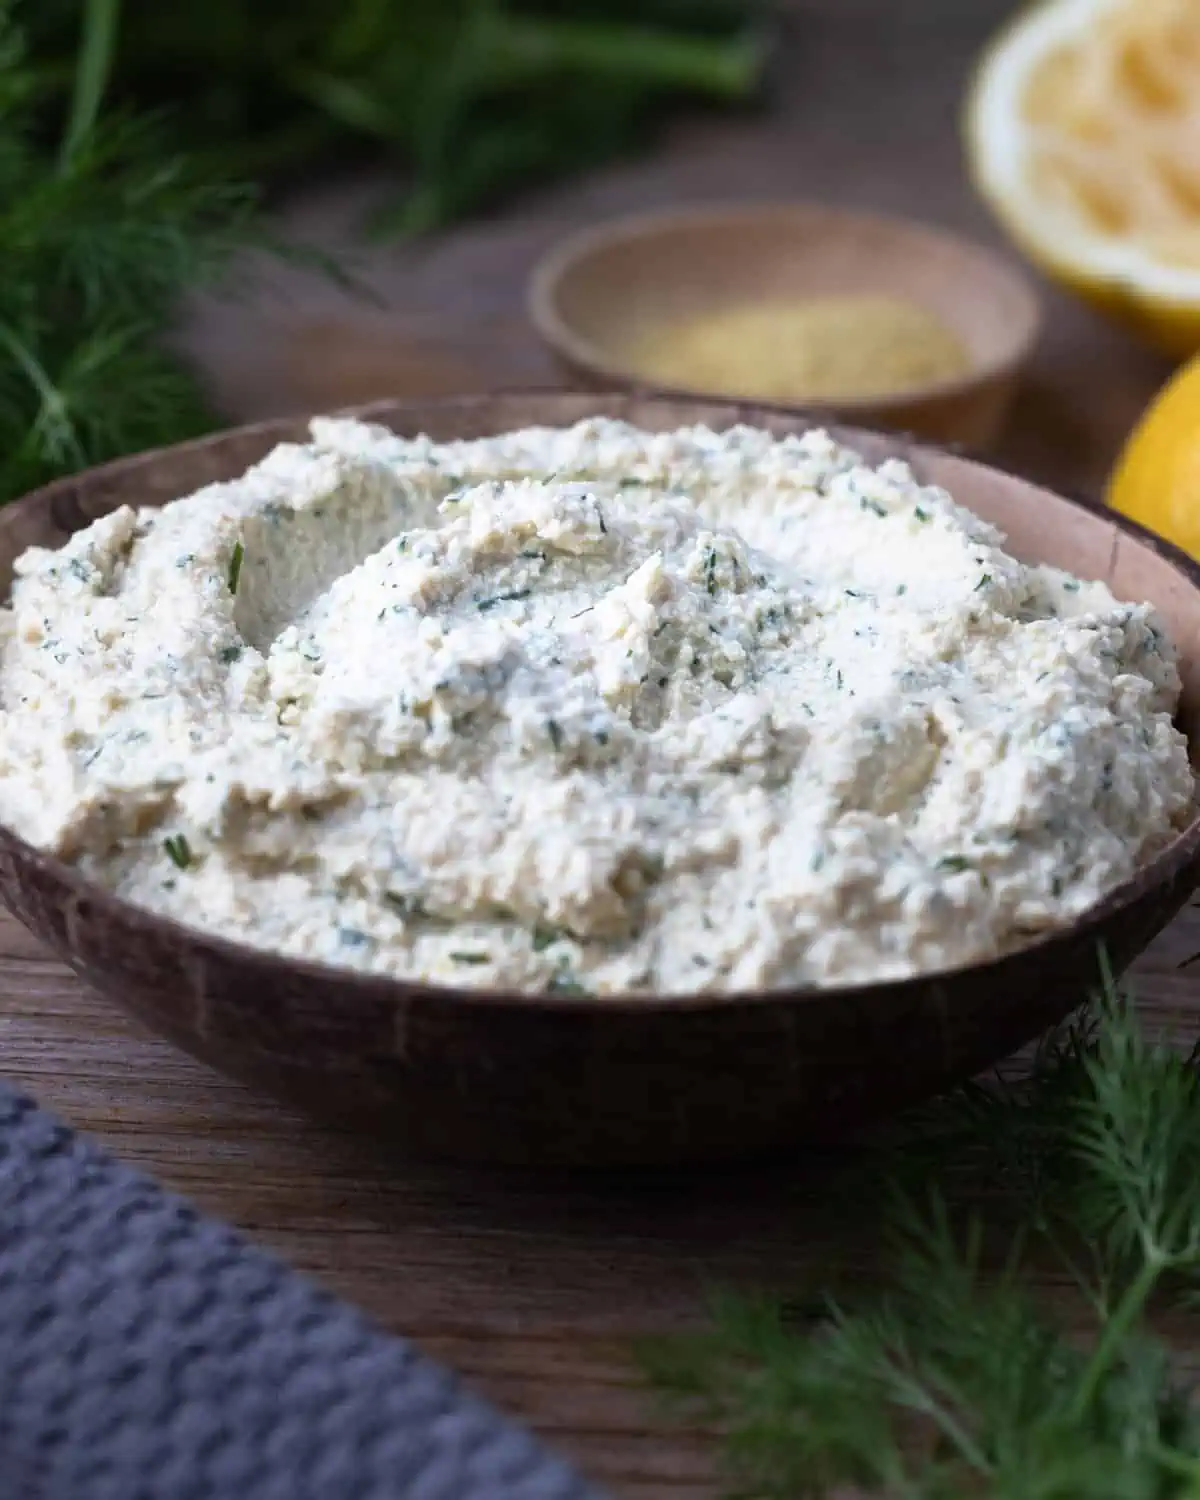 A close-up of a wooden bowl filled with tofu cheese ricotta and dill.